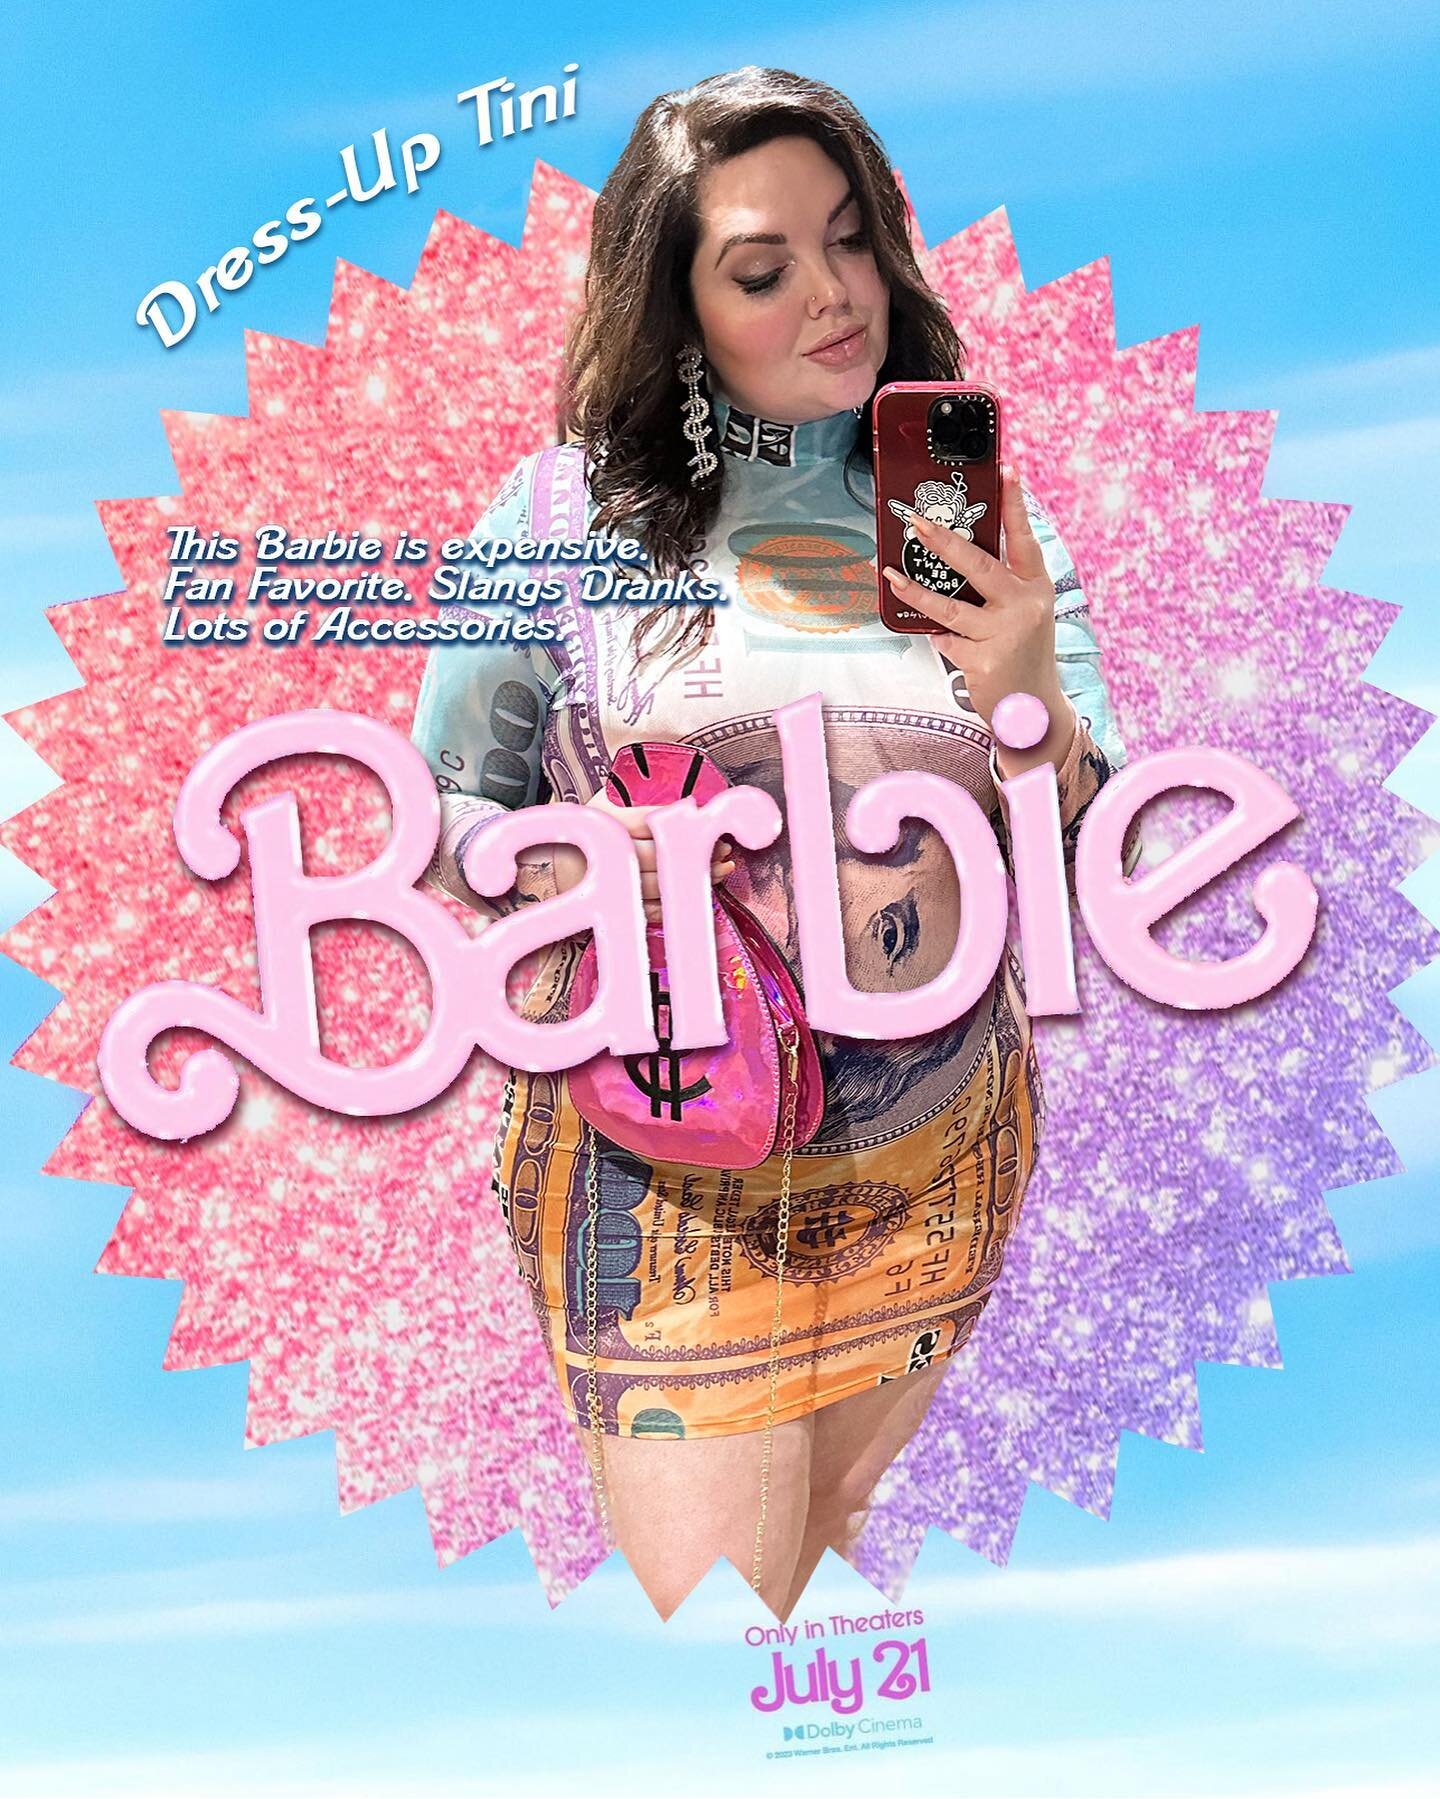 Since Meta took away Reels Pay, I shall return to our regularly-scheduled PHOTO content. Starting with these flyers designed to celebrate the new @barbie movie!
These are the Barbies I would be 🤣
What Barbie are you??
#barbie #barbiemovie #barbiedol